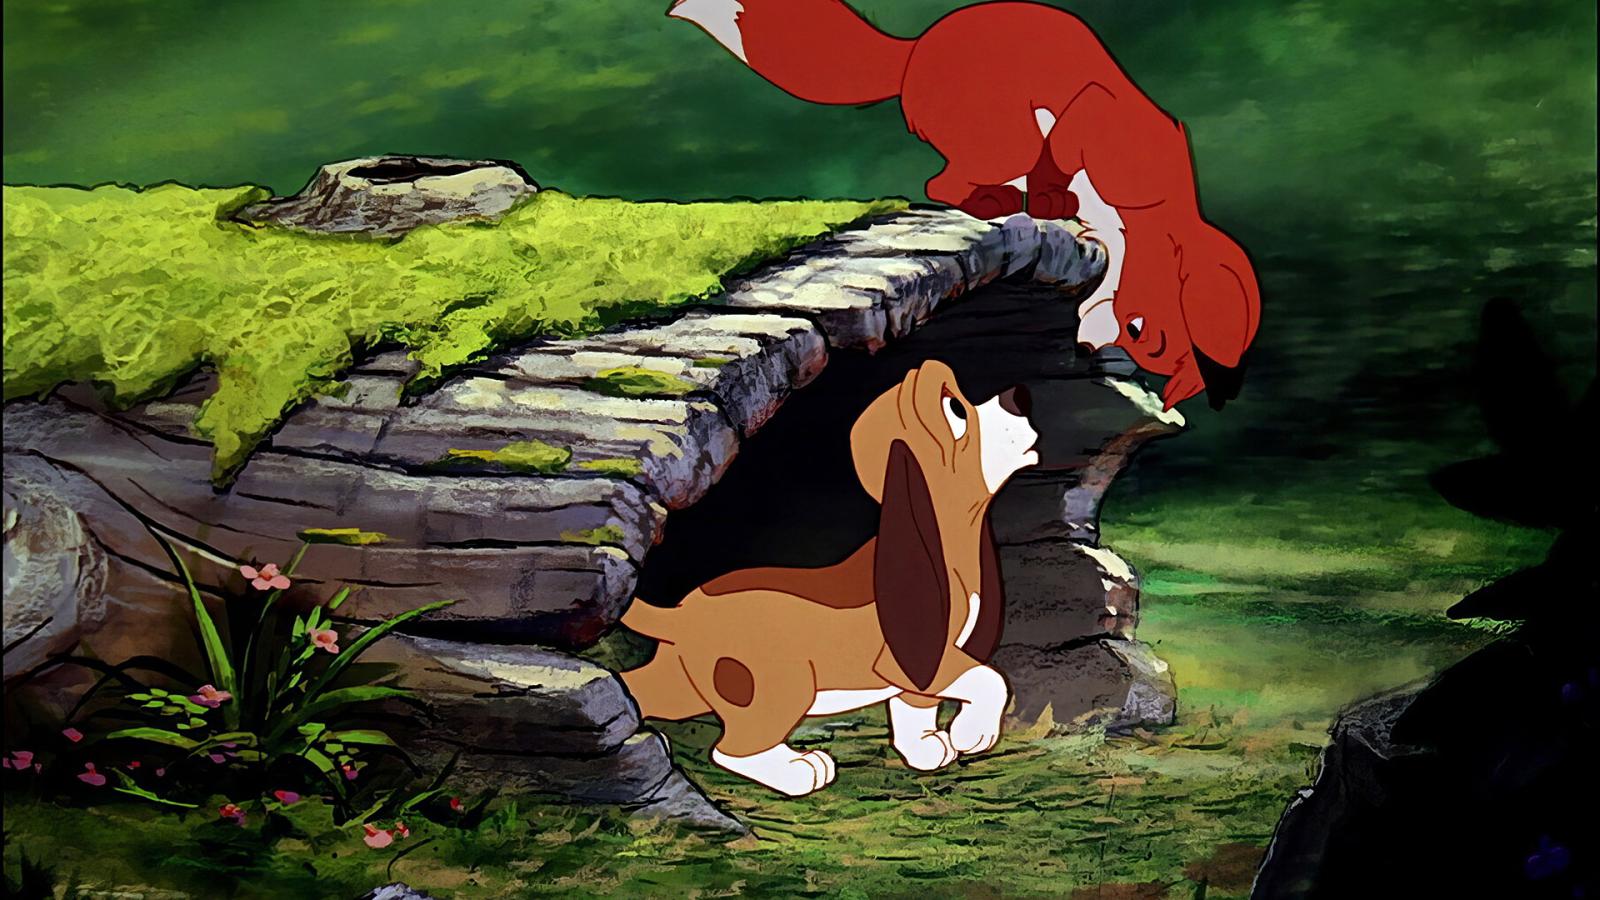 The 10 Lesser-Known Disney Films You Probably Never Heard Of - image 5